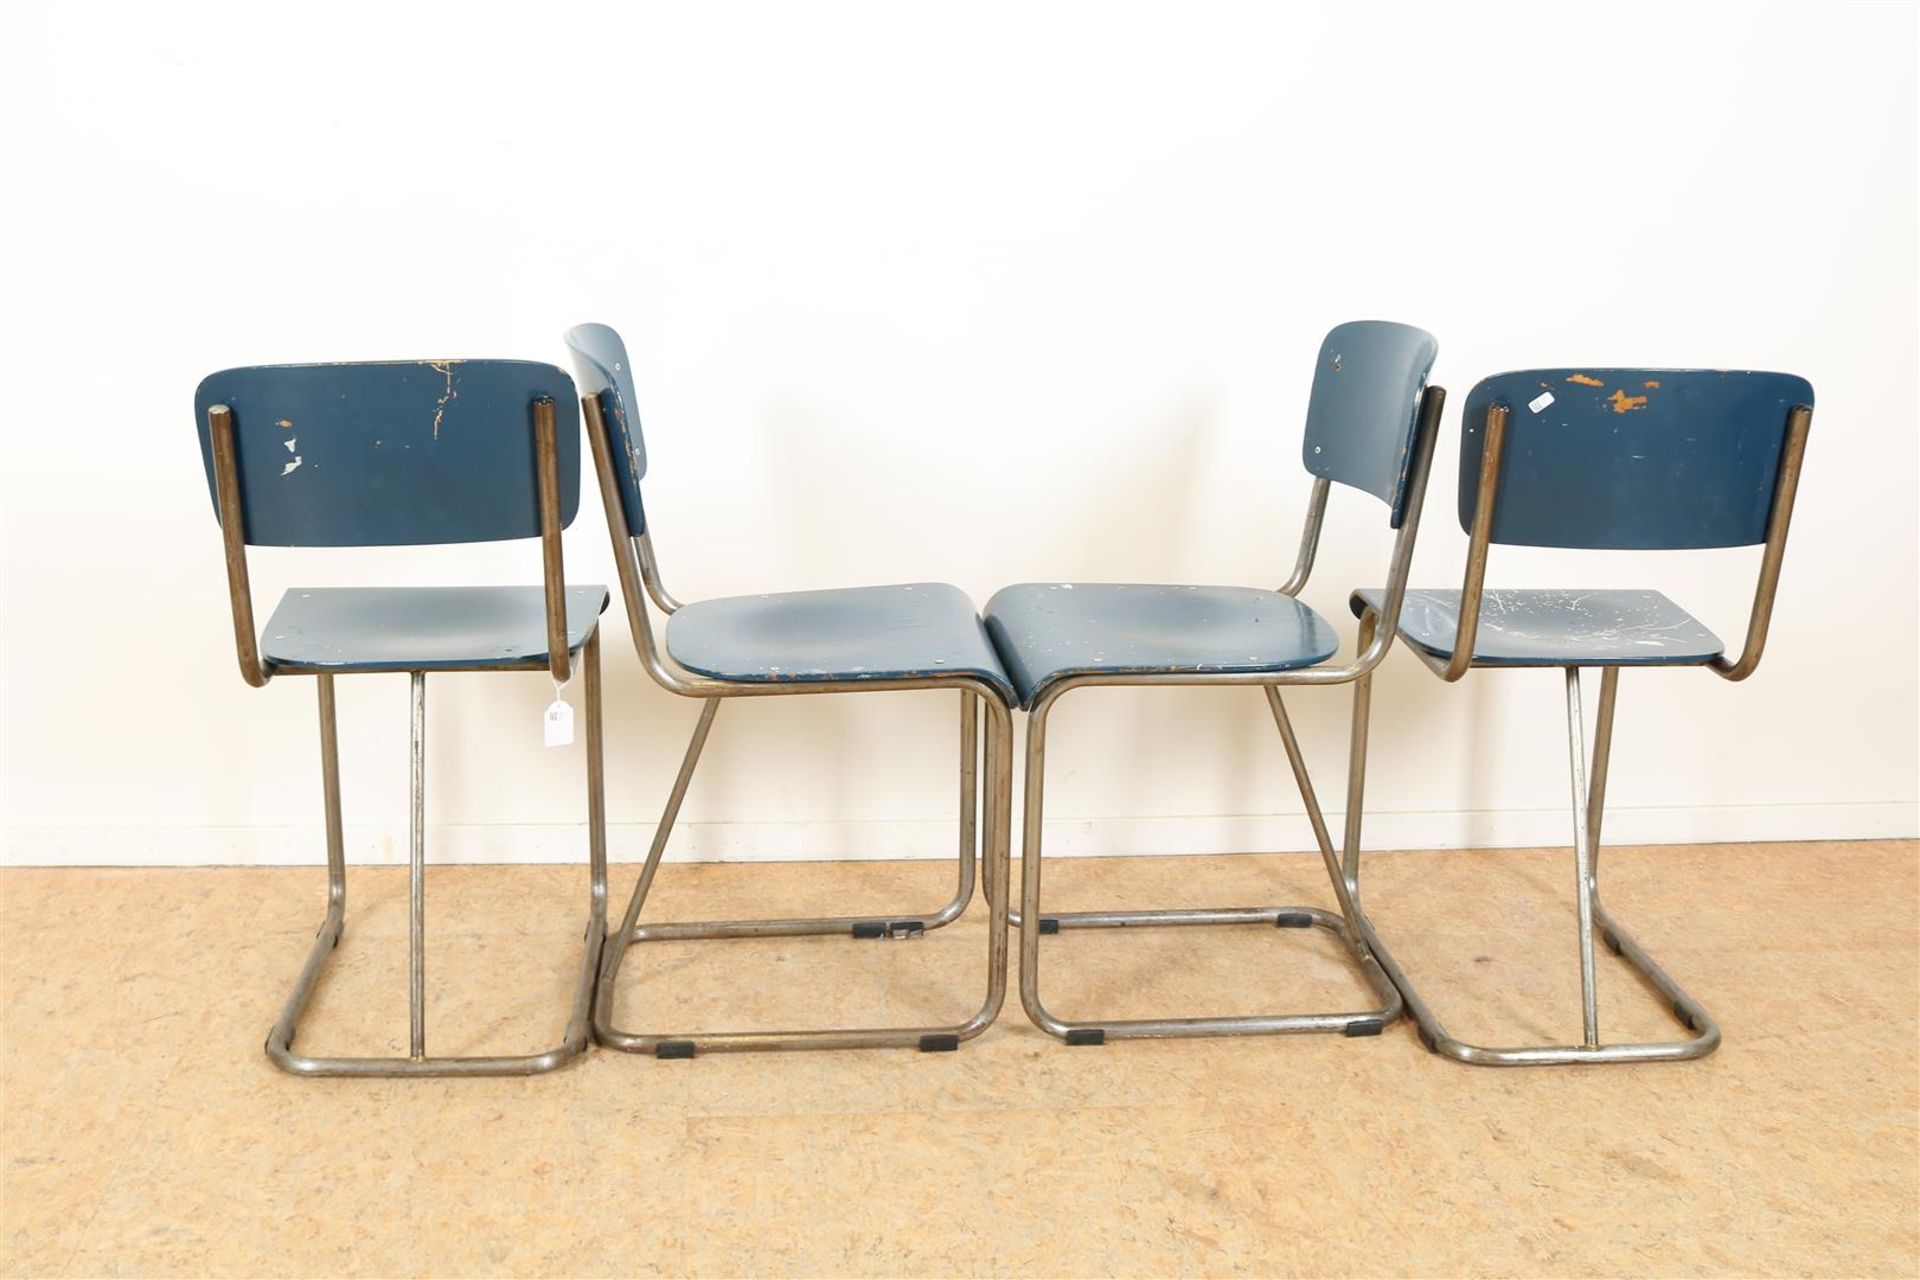 Series of 4 chrome tube Gispen chairs with blue wooden seat and backrest, model 107, produced - Image 4 of 4